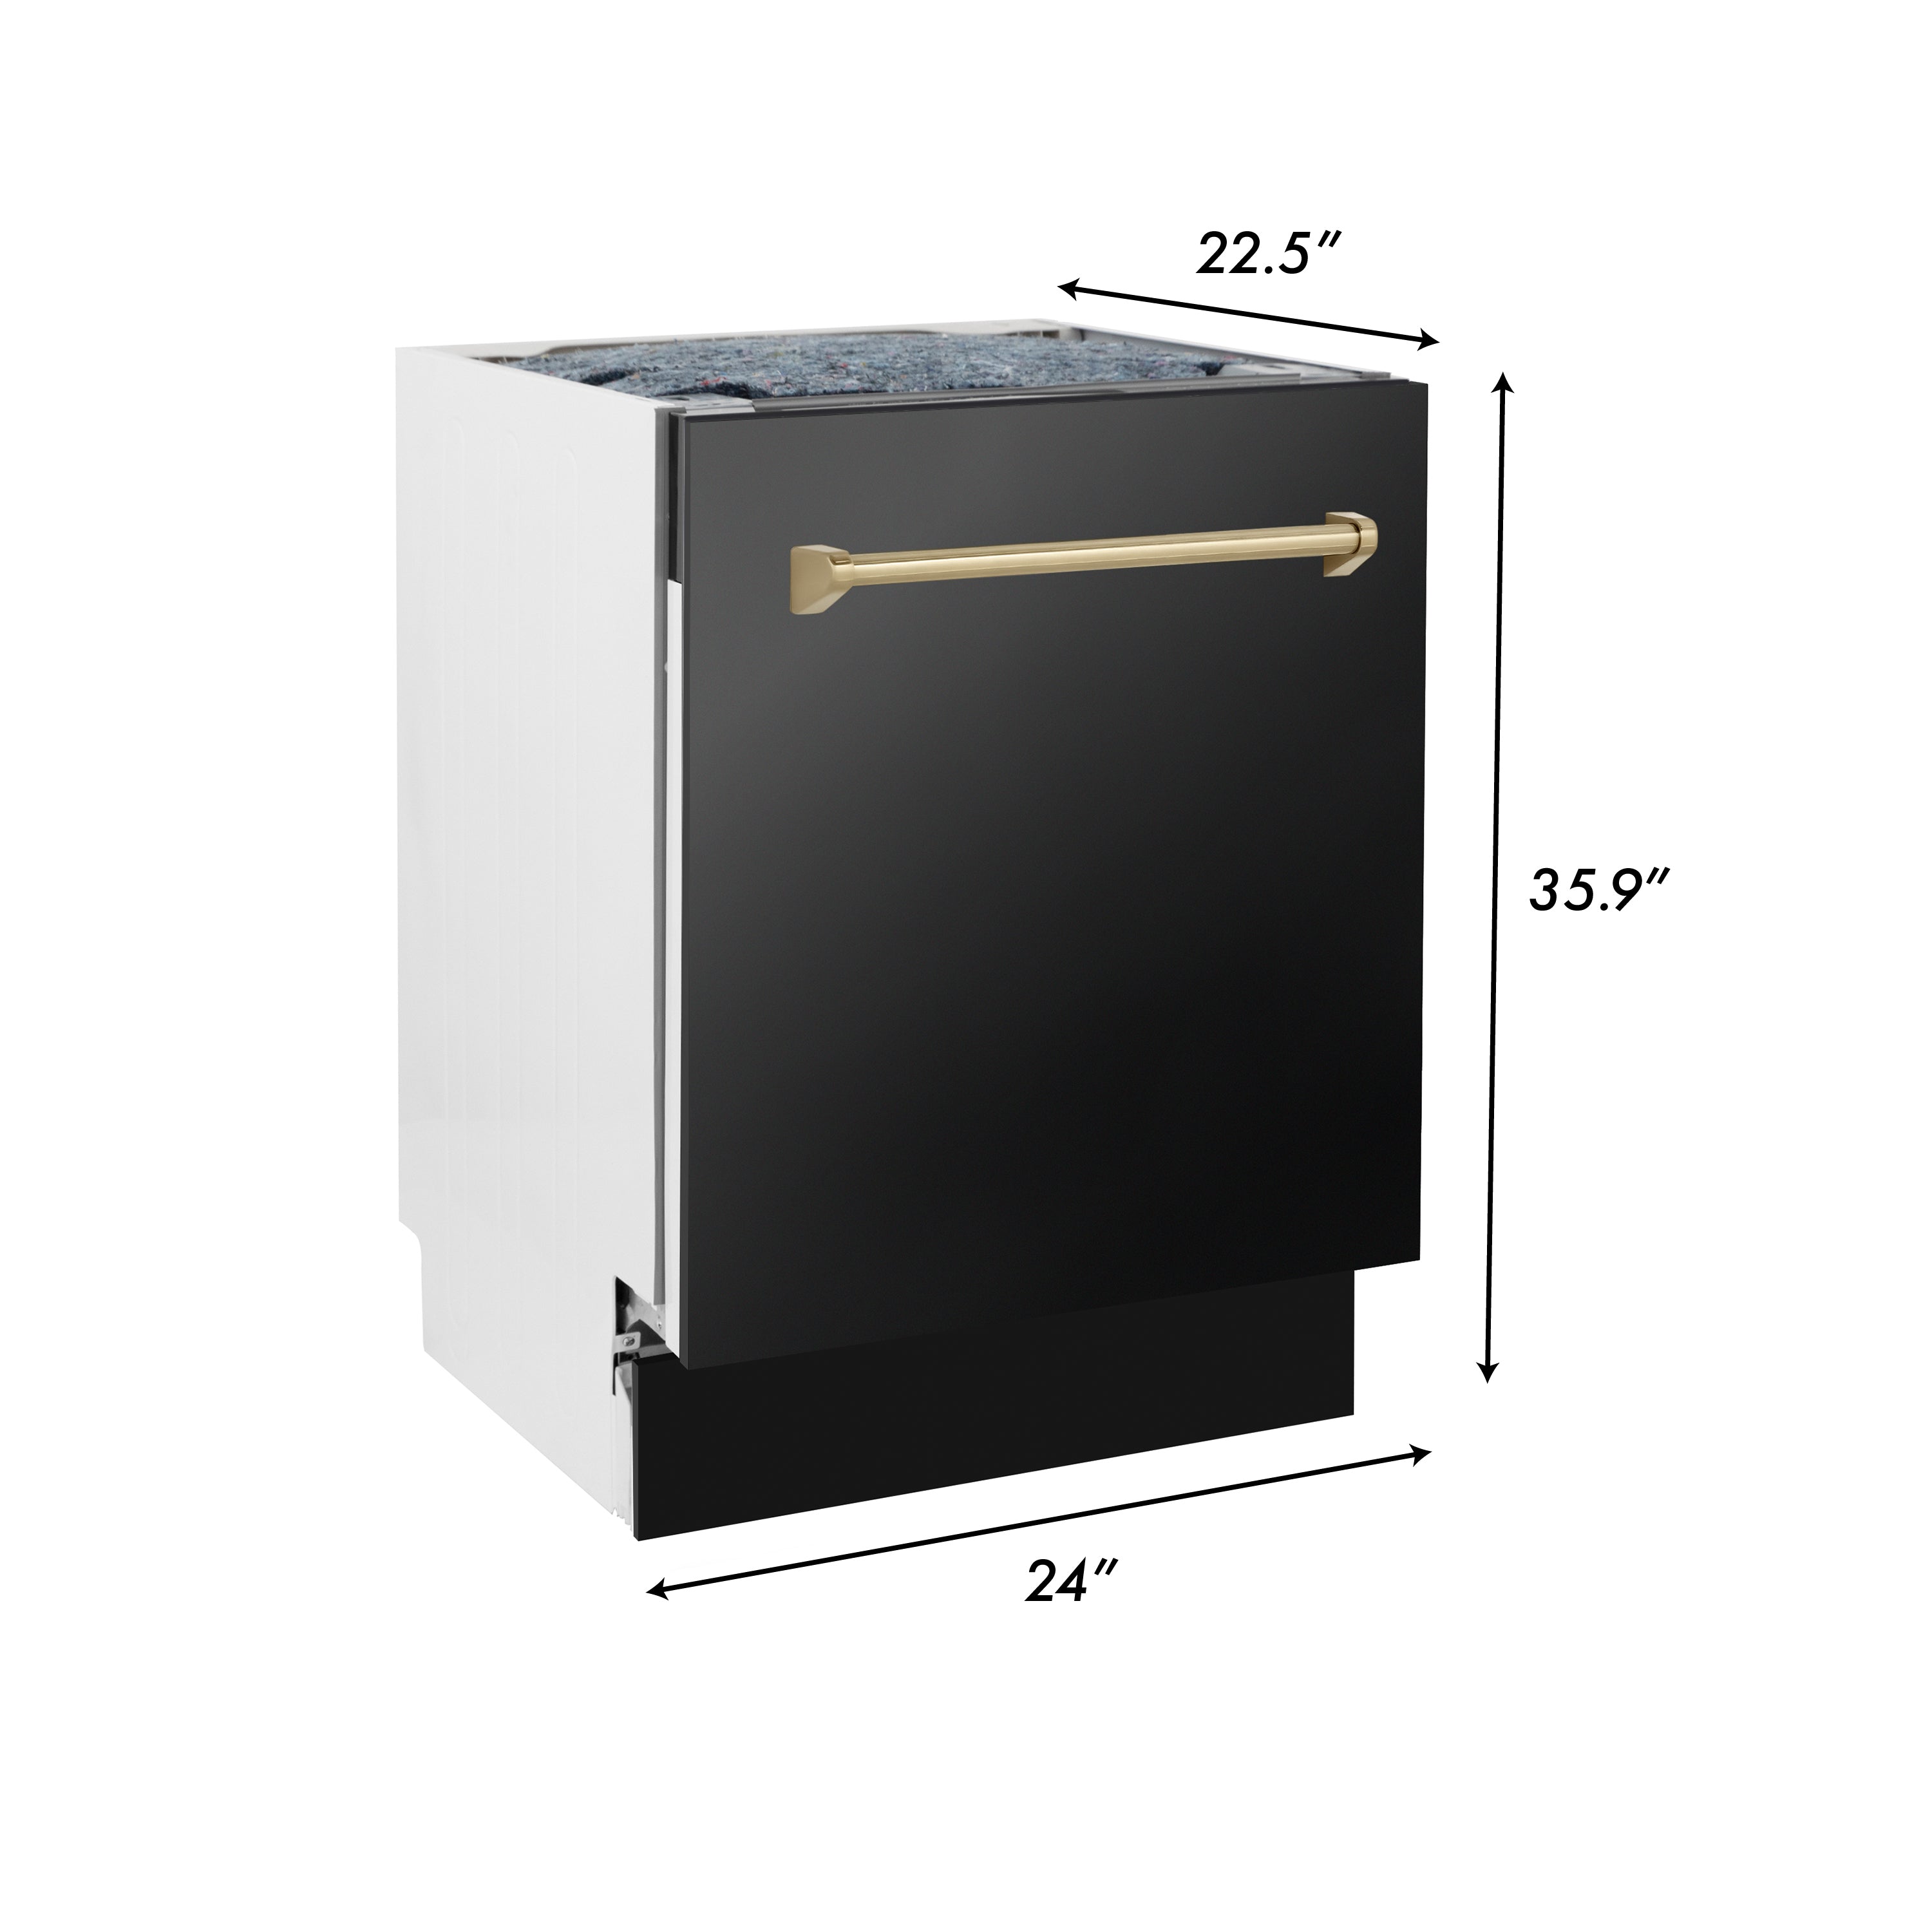 ZLINE 48 Autograph Edition Kitchen Package with Stainless Steel Dual Fuel Range, Range Hood, Dishwasher and Refrigeration with Gold Accents